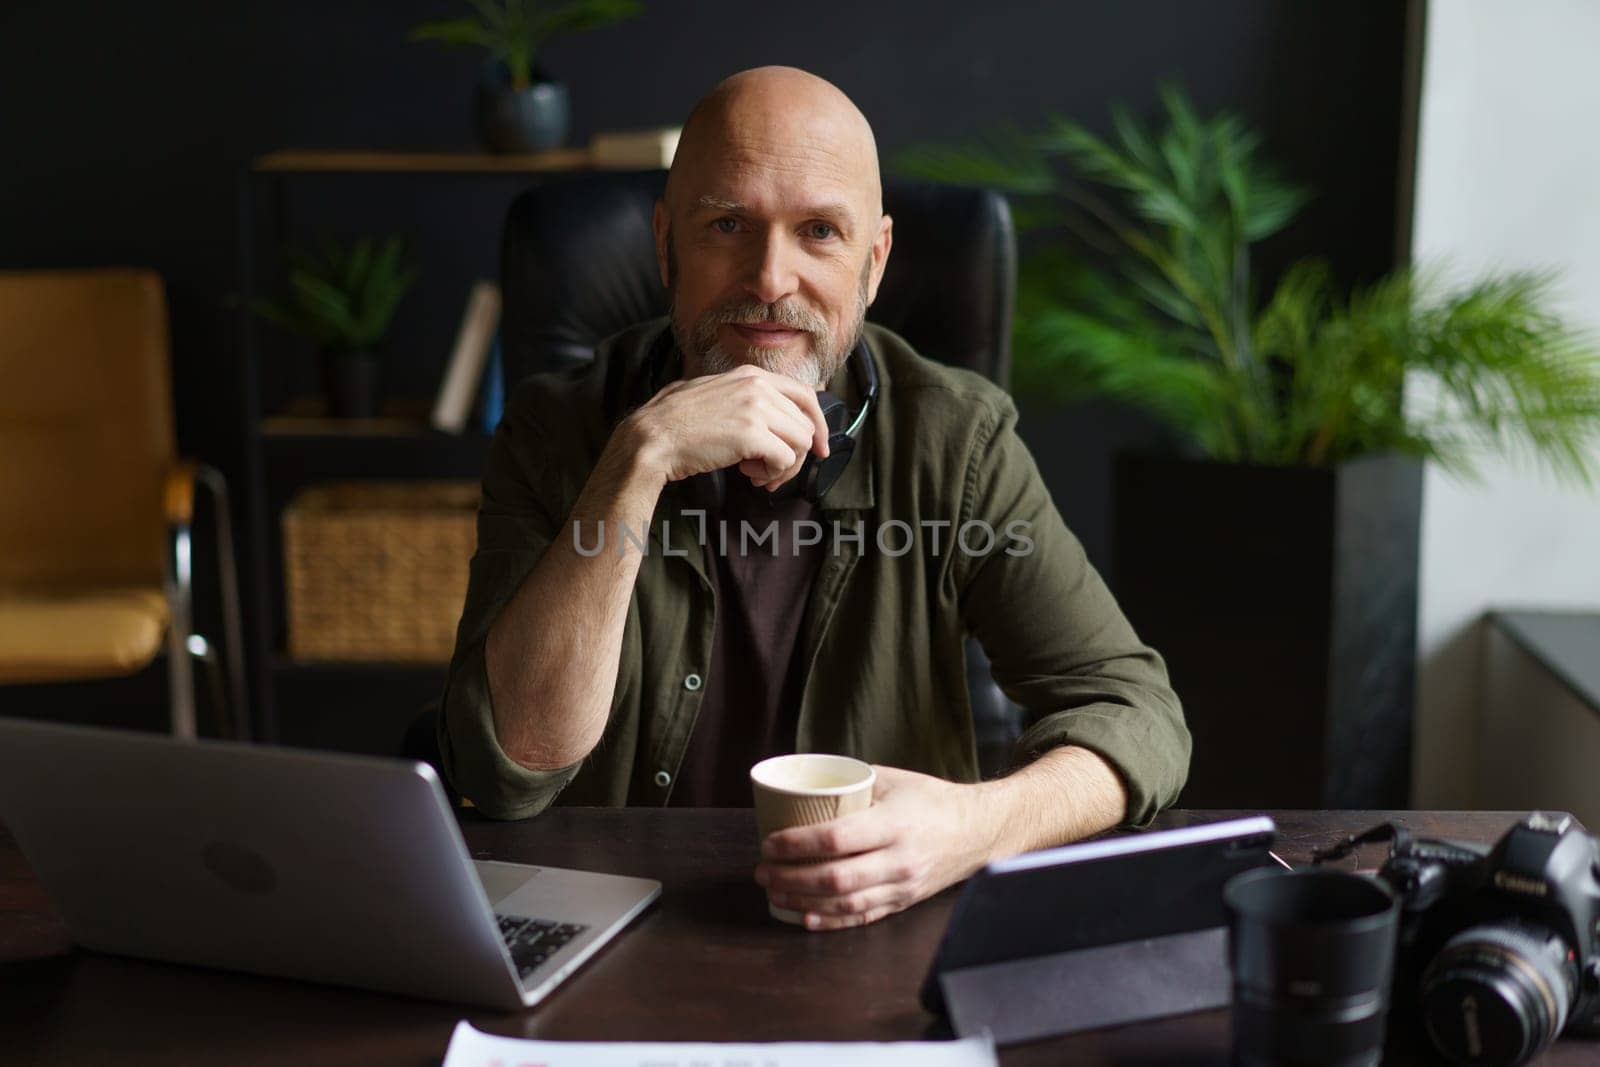 Old photographer, senior man, seated at desk in cozy home environment. table adorned with cup of coffee, photo camera, laptop, and various lenses, indicating deep involvement in world of photography. . High quality photo